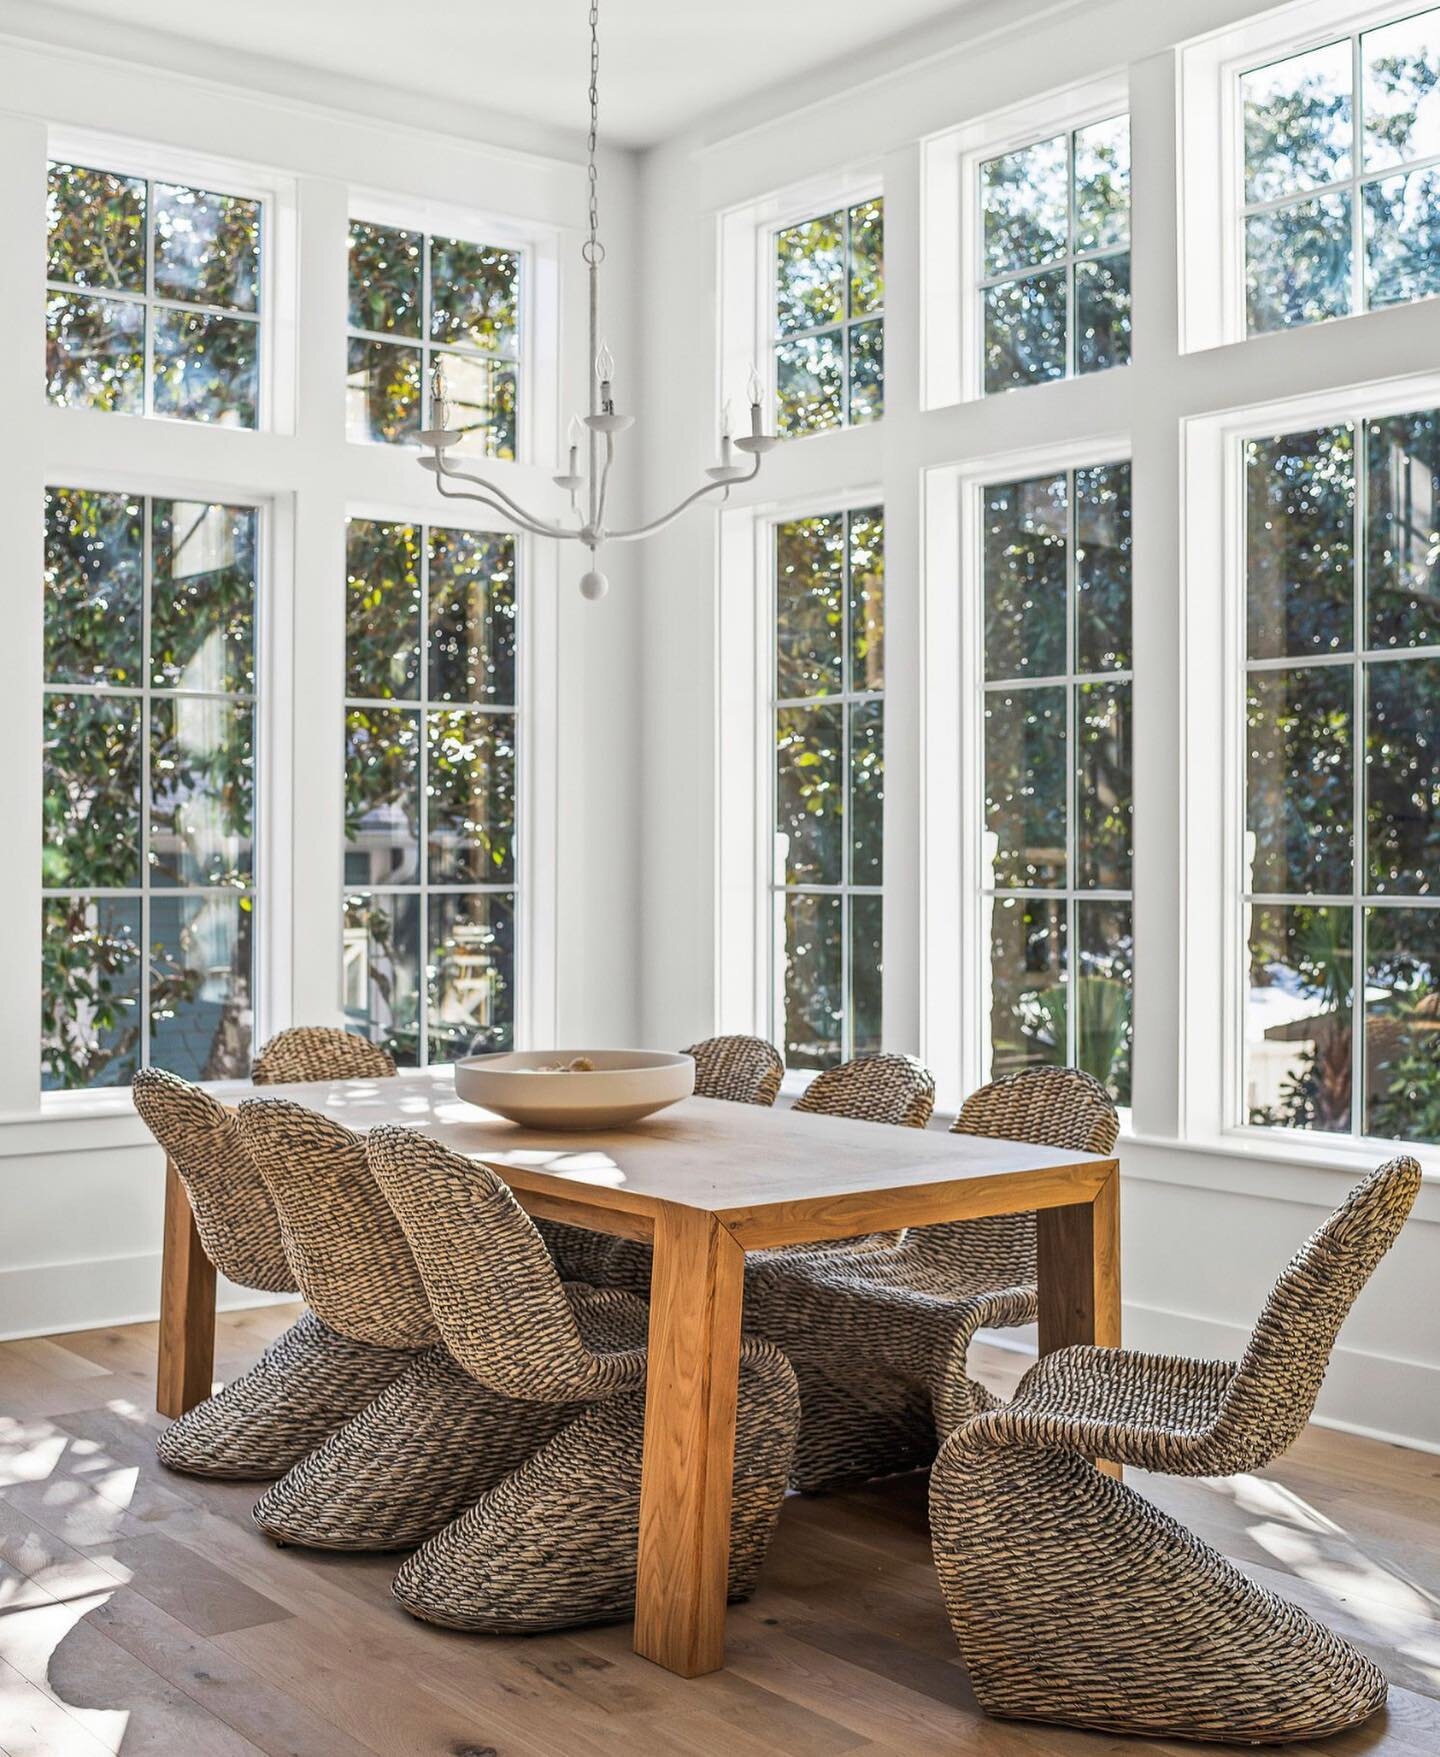 Natural light and a fun set of chairs are the perfect way to set the table (and the mood) for morning coffee or evening conversation.

#interiordesign #interiordesigner #marissaadler #marissaadlerdesigns #luxuryhomes #interiordesignersofinsta #dining